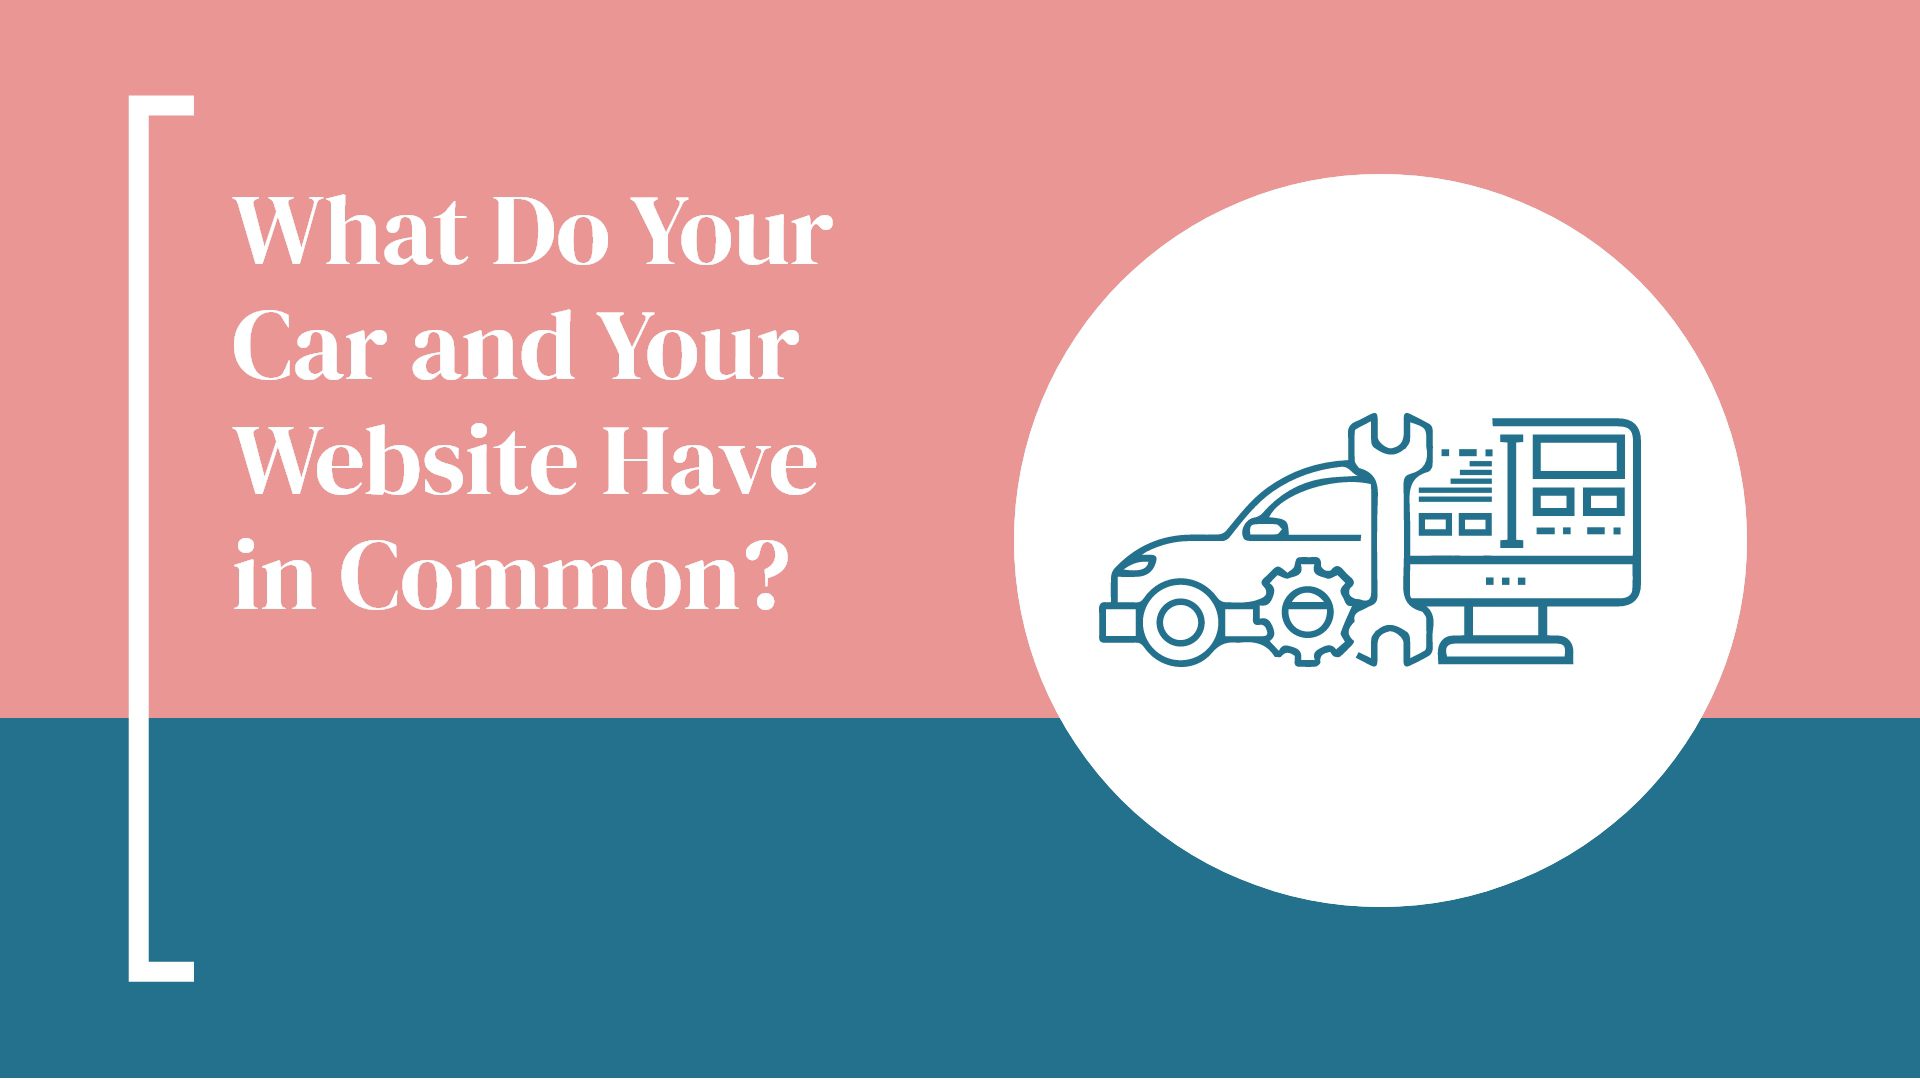 What Do Your Car and Your Website Have in Common?